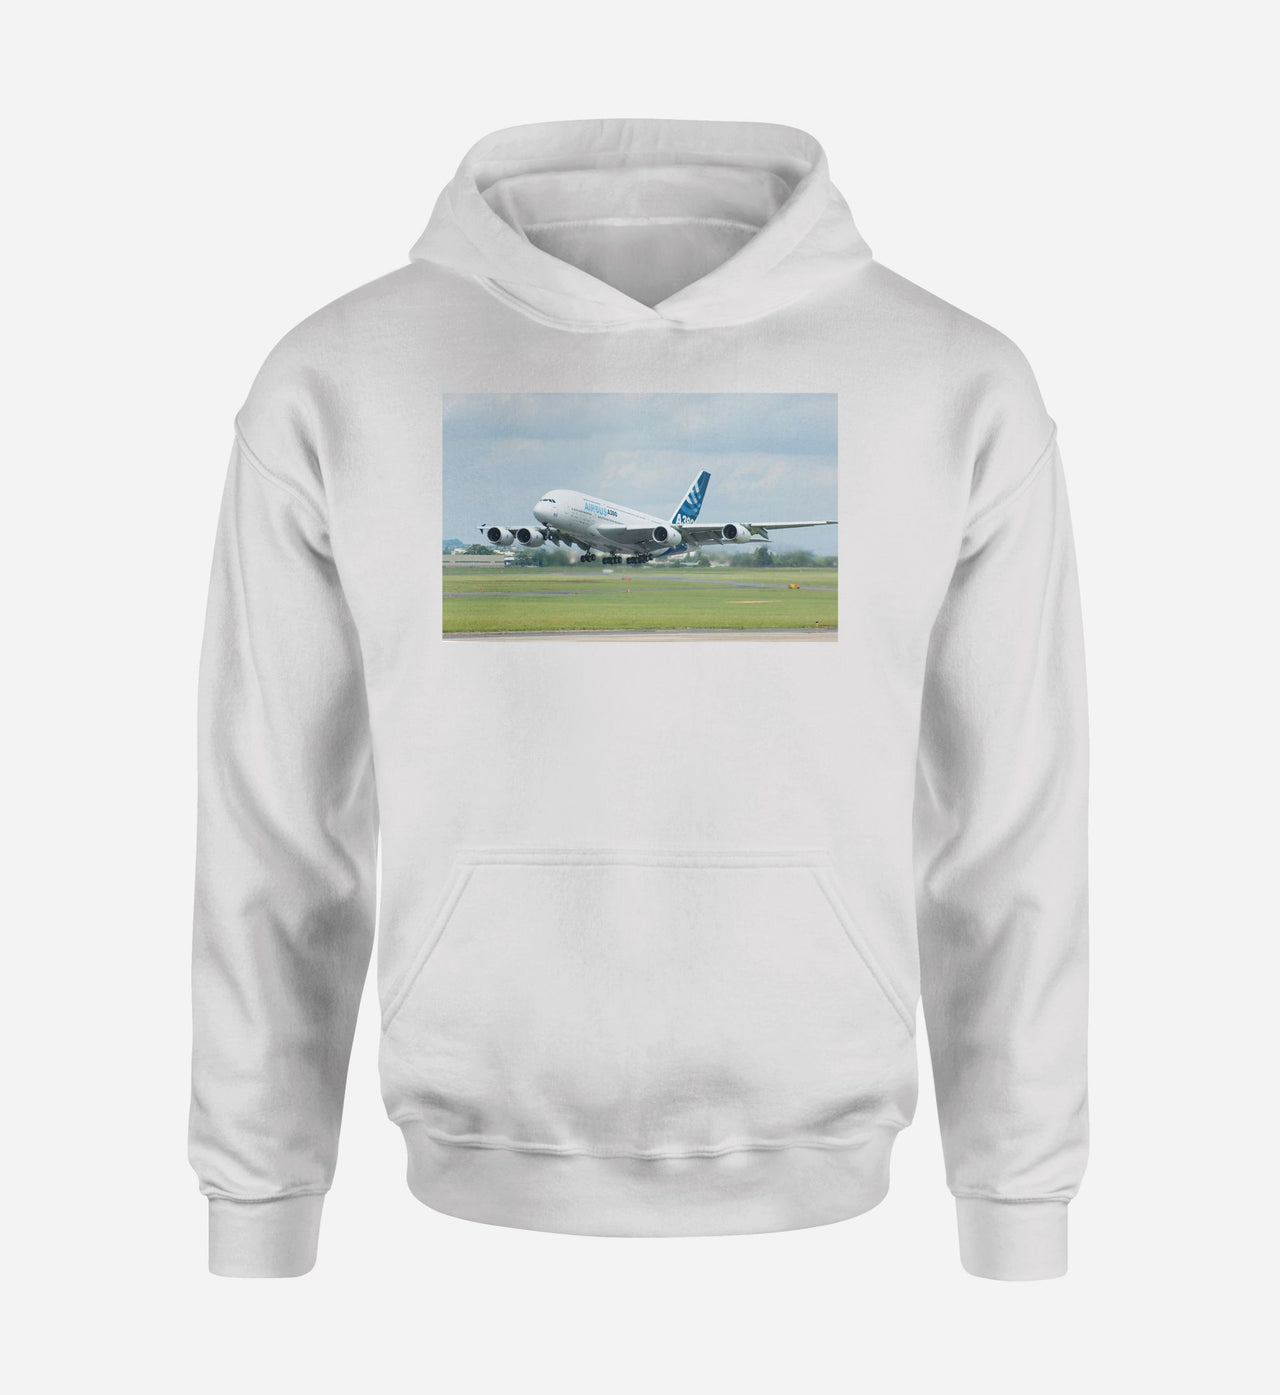 Departing Airbus A380 with Original Livery Designed Hoodies